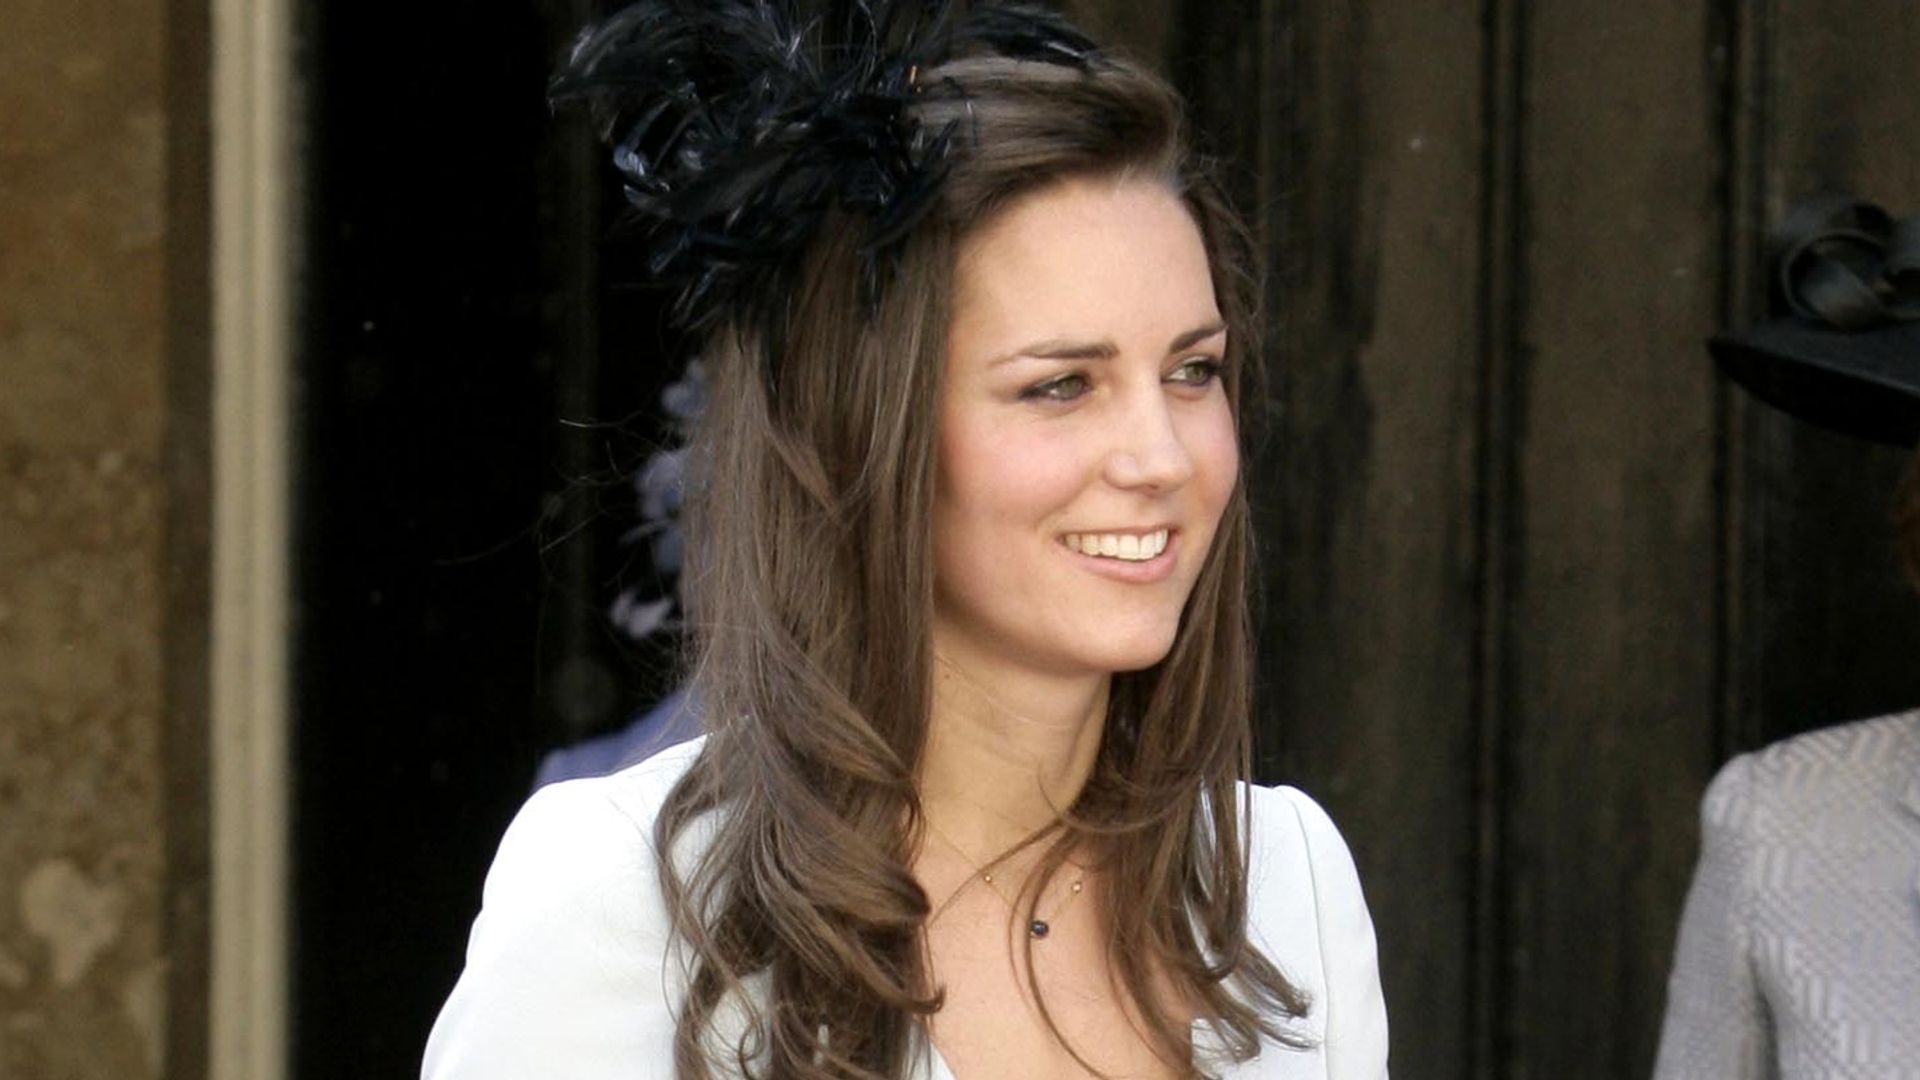 Princess Kate, 26, was a daring wedding guest in low-cut dress and ...